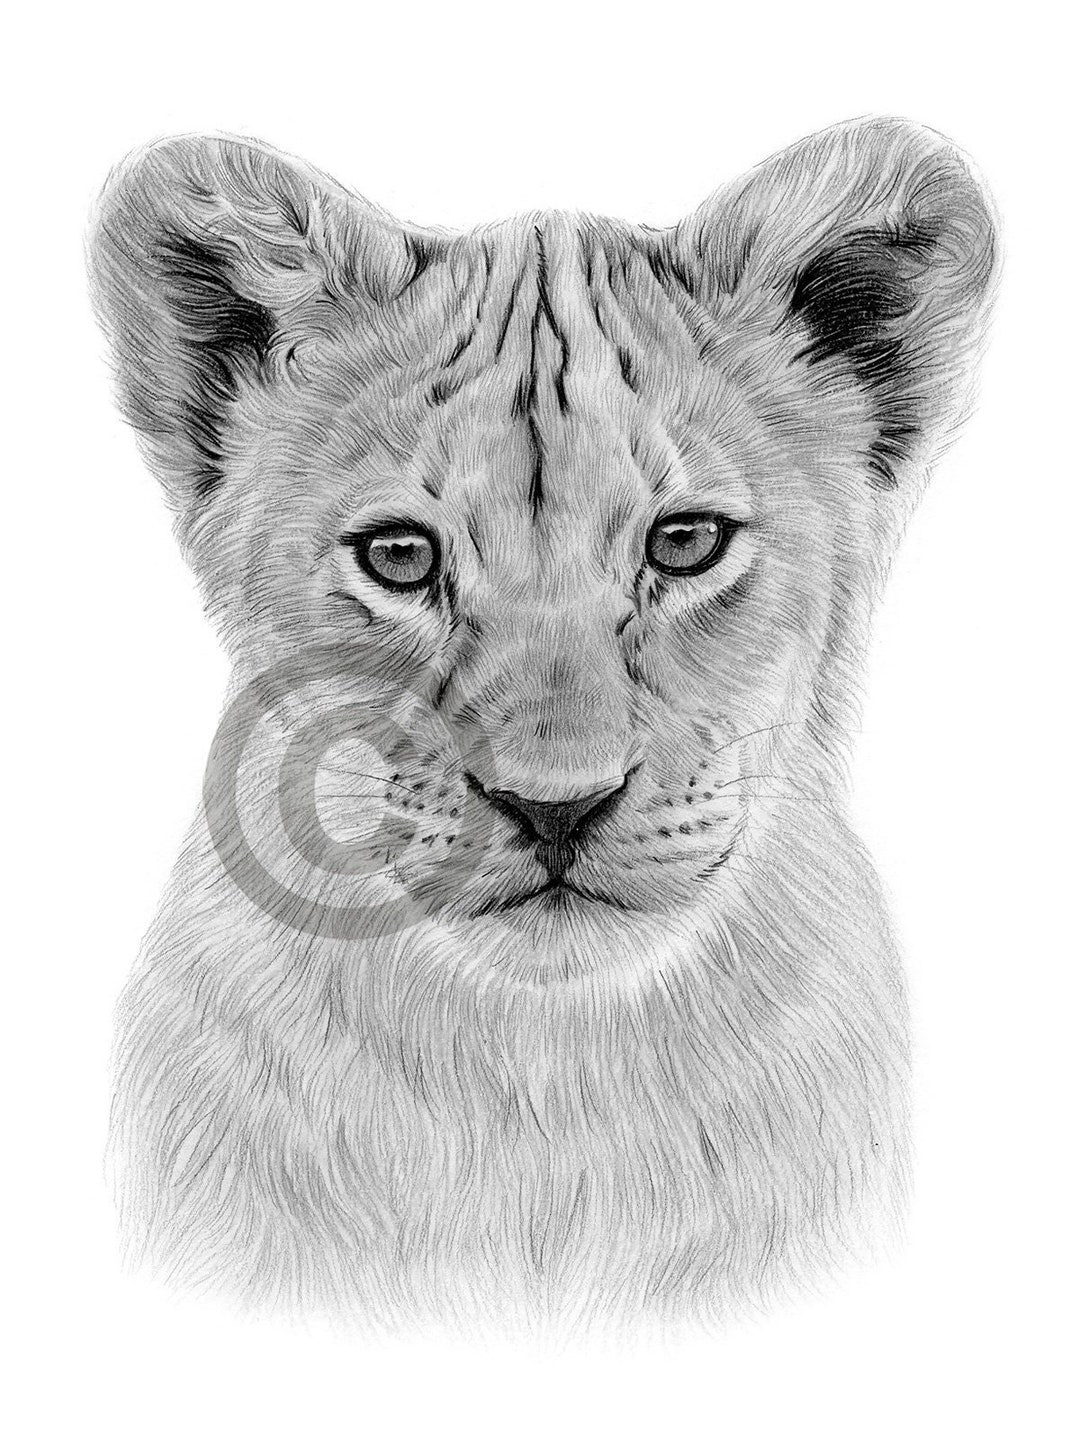 fast-version) How to Draw a Lion / cub - Step by Step Tutorial - YouTube